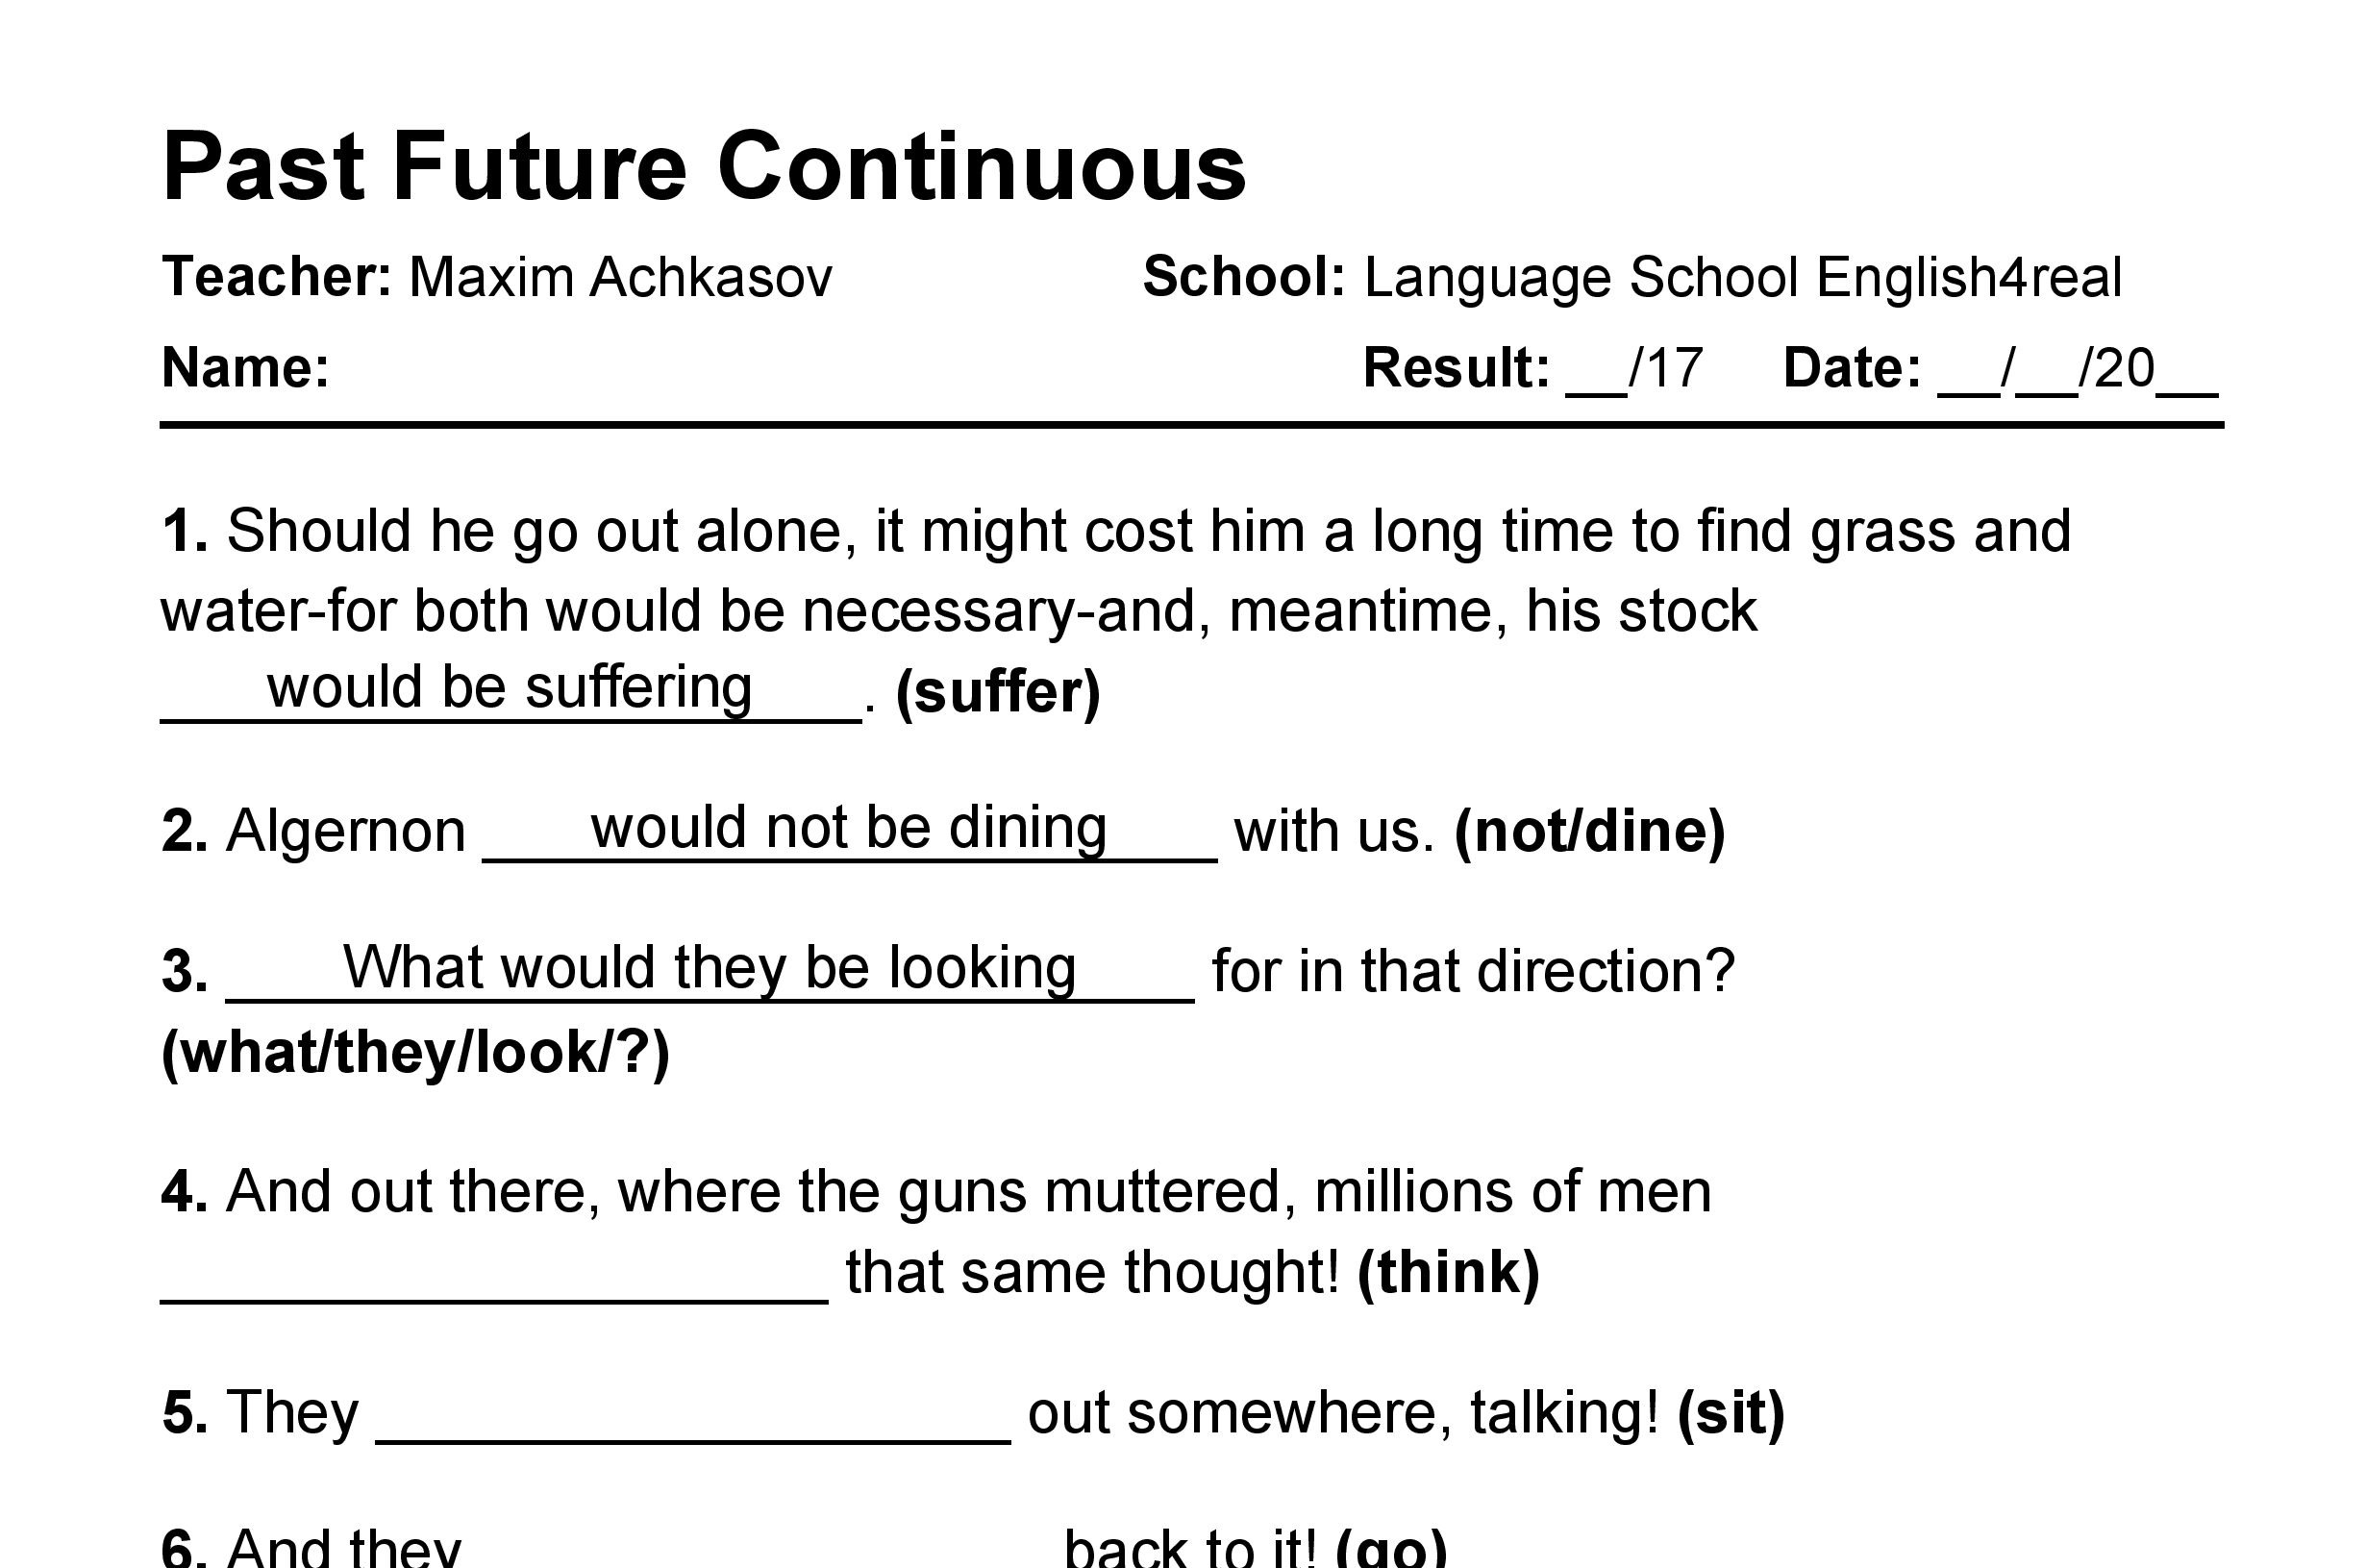 English grammar fill in the blanks exercises with answers in PDF - Past Future Continuous